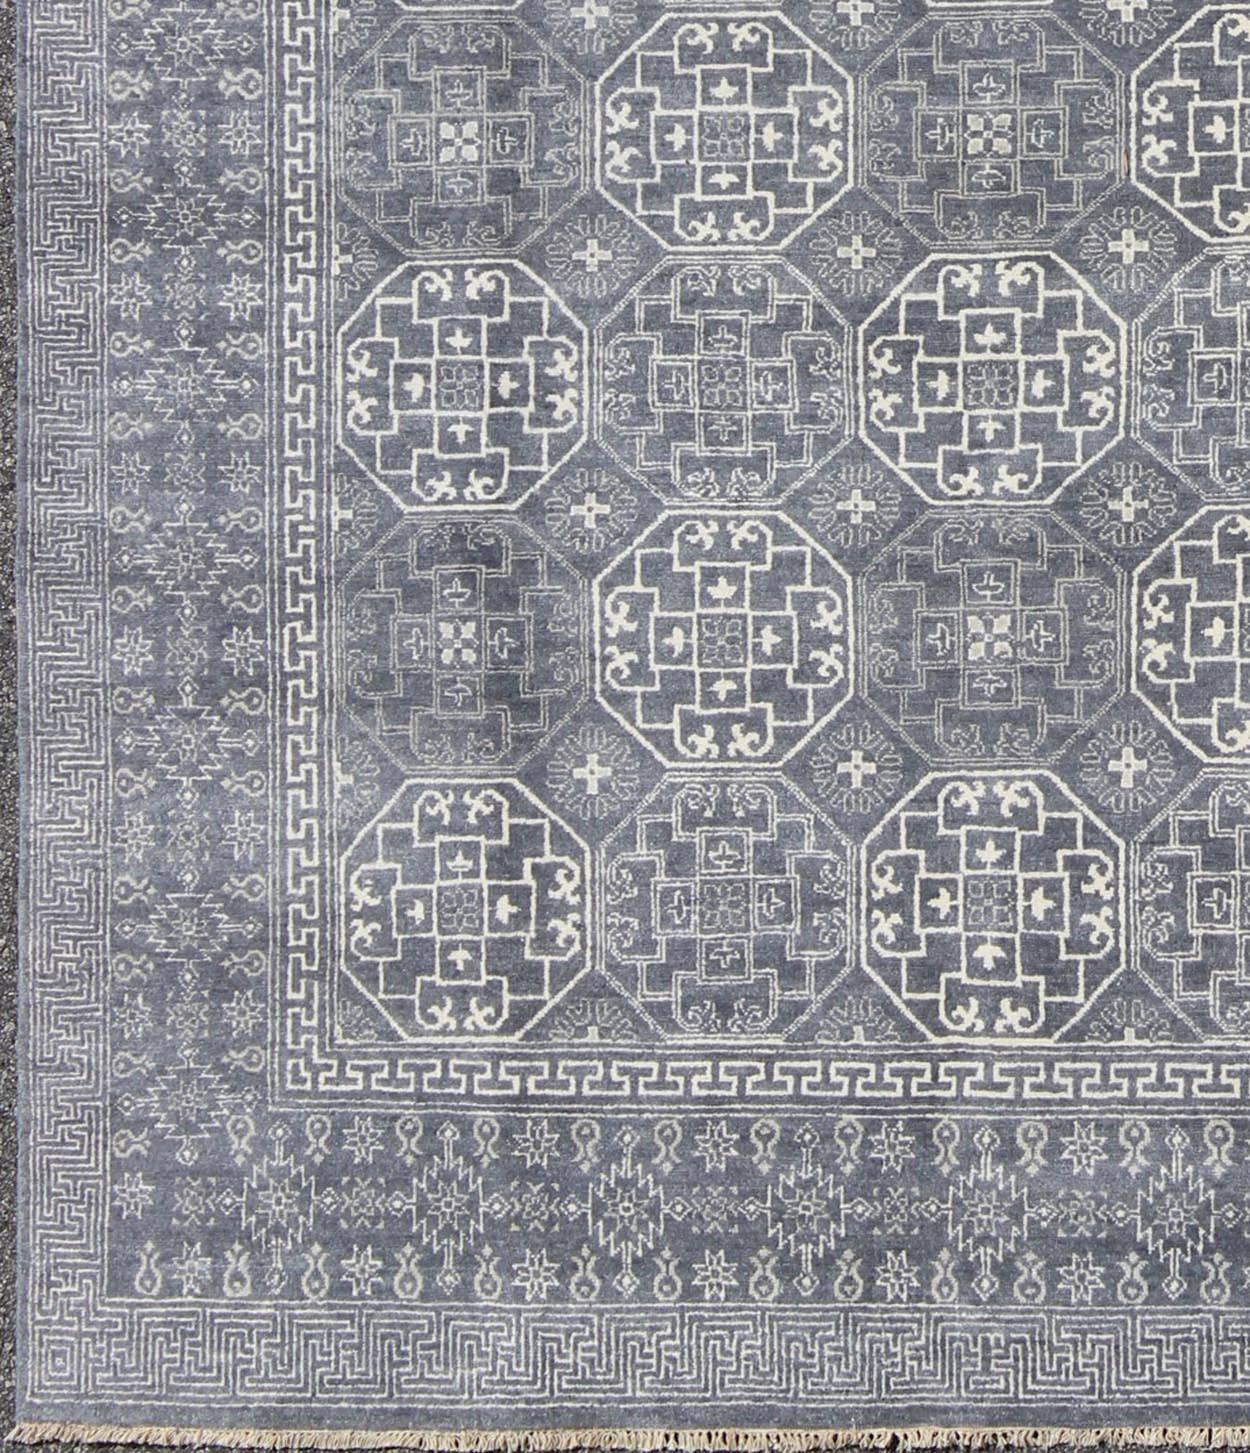 Antique reproduction Indian Khotan rug in shades of gray and blue, rug sus-1803-387, country of origin / type: Turkestan / Khotan, 2018.

This attractive reproduction Khotan rug is a spectacular testament to the complexity of Turkestan design. The